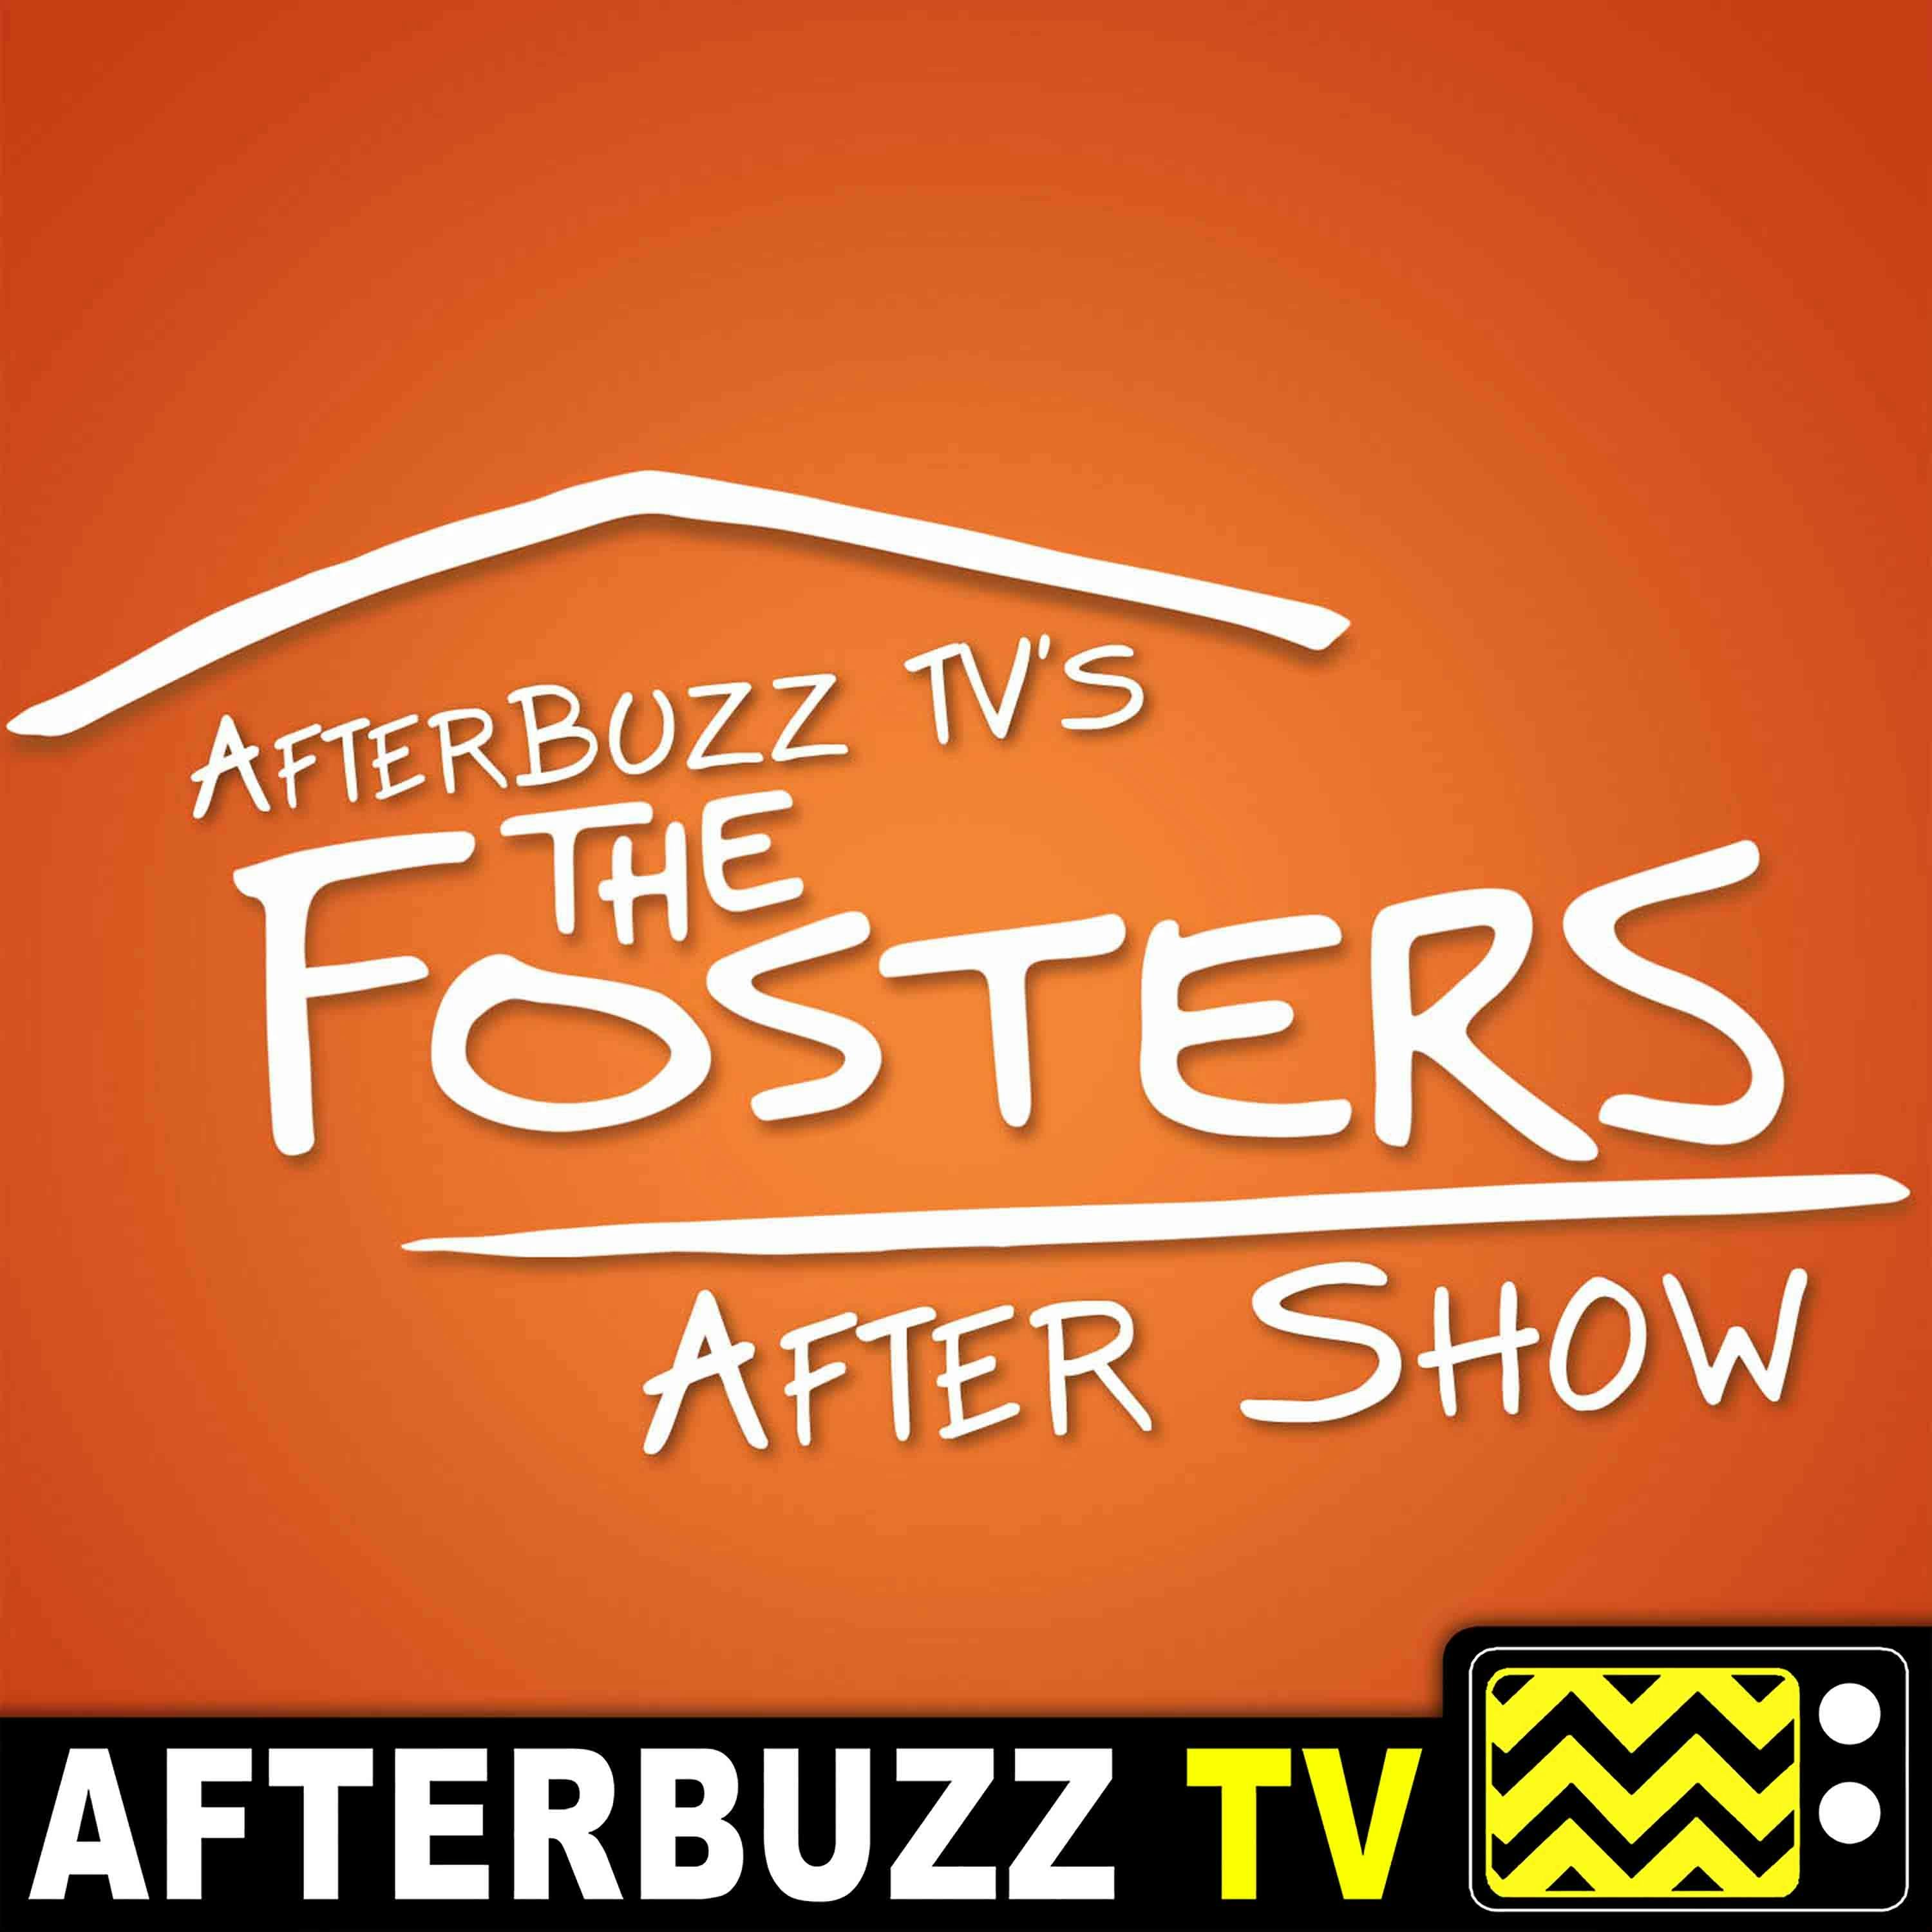 The Fosters S:5 | Meet the Fosters; Turks & Caicos; Where The Heart Is E:20 – E:22 | AfterBuzz TV AfterShow